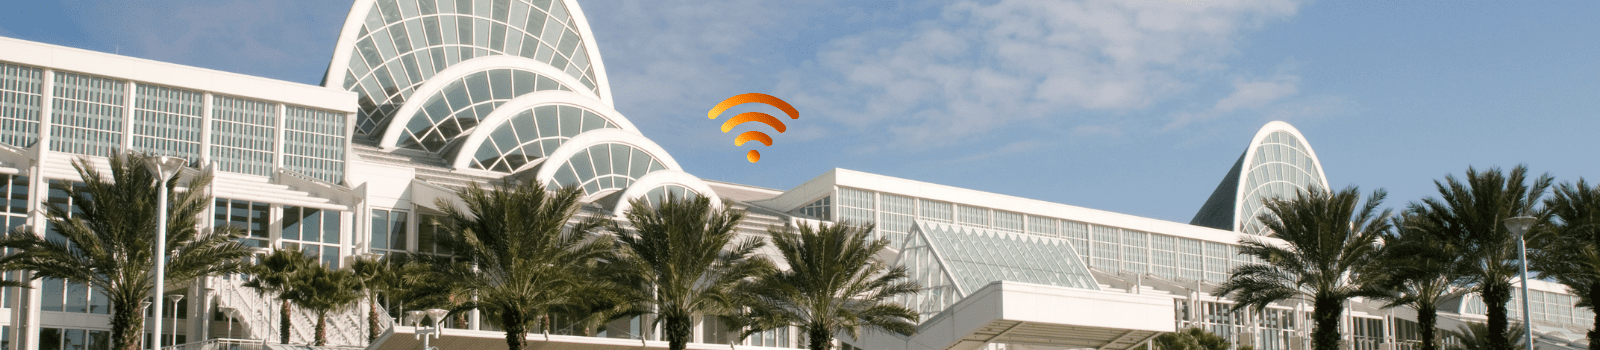 The Future of Event Connectivity Leveraging Passpoint based Wi Fi Platform